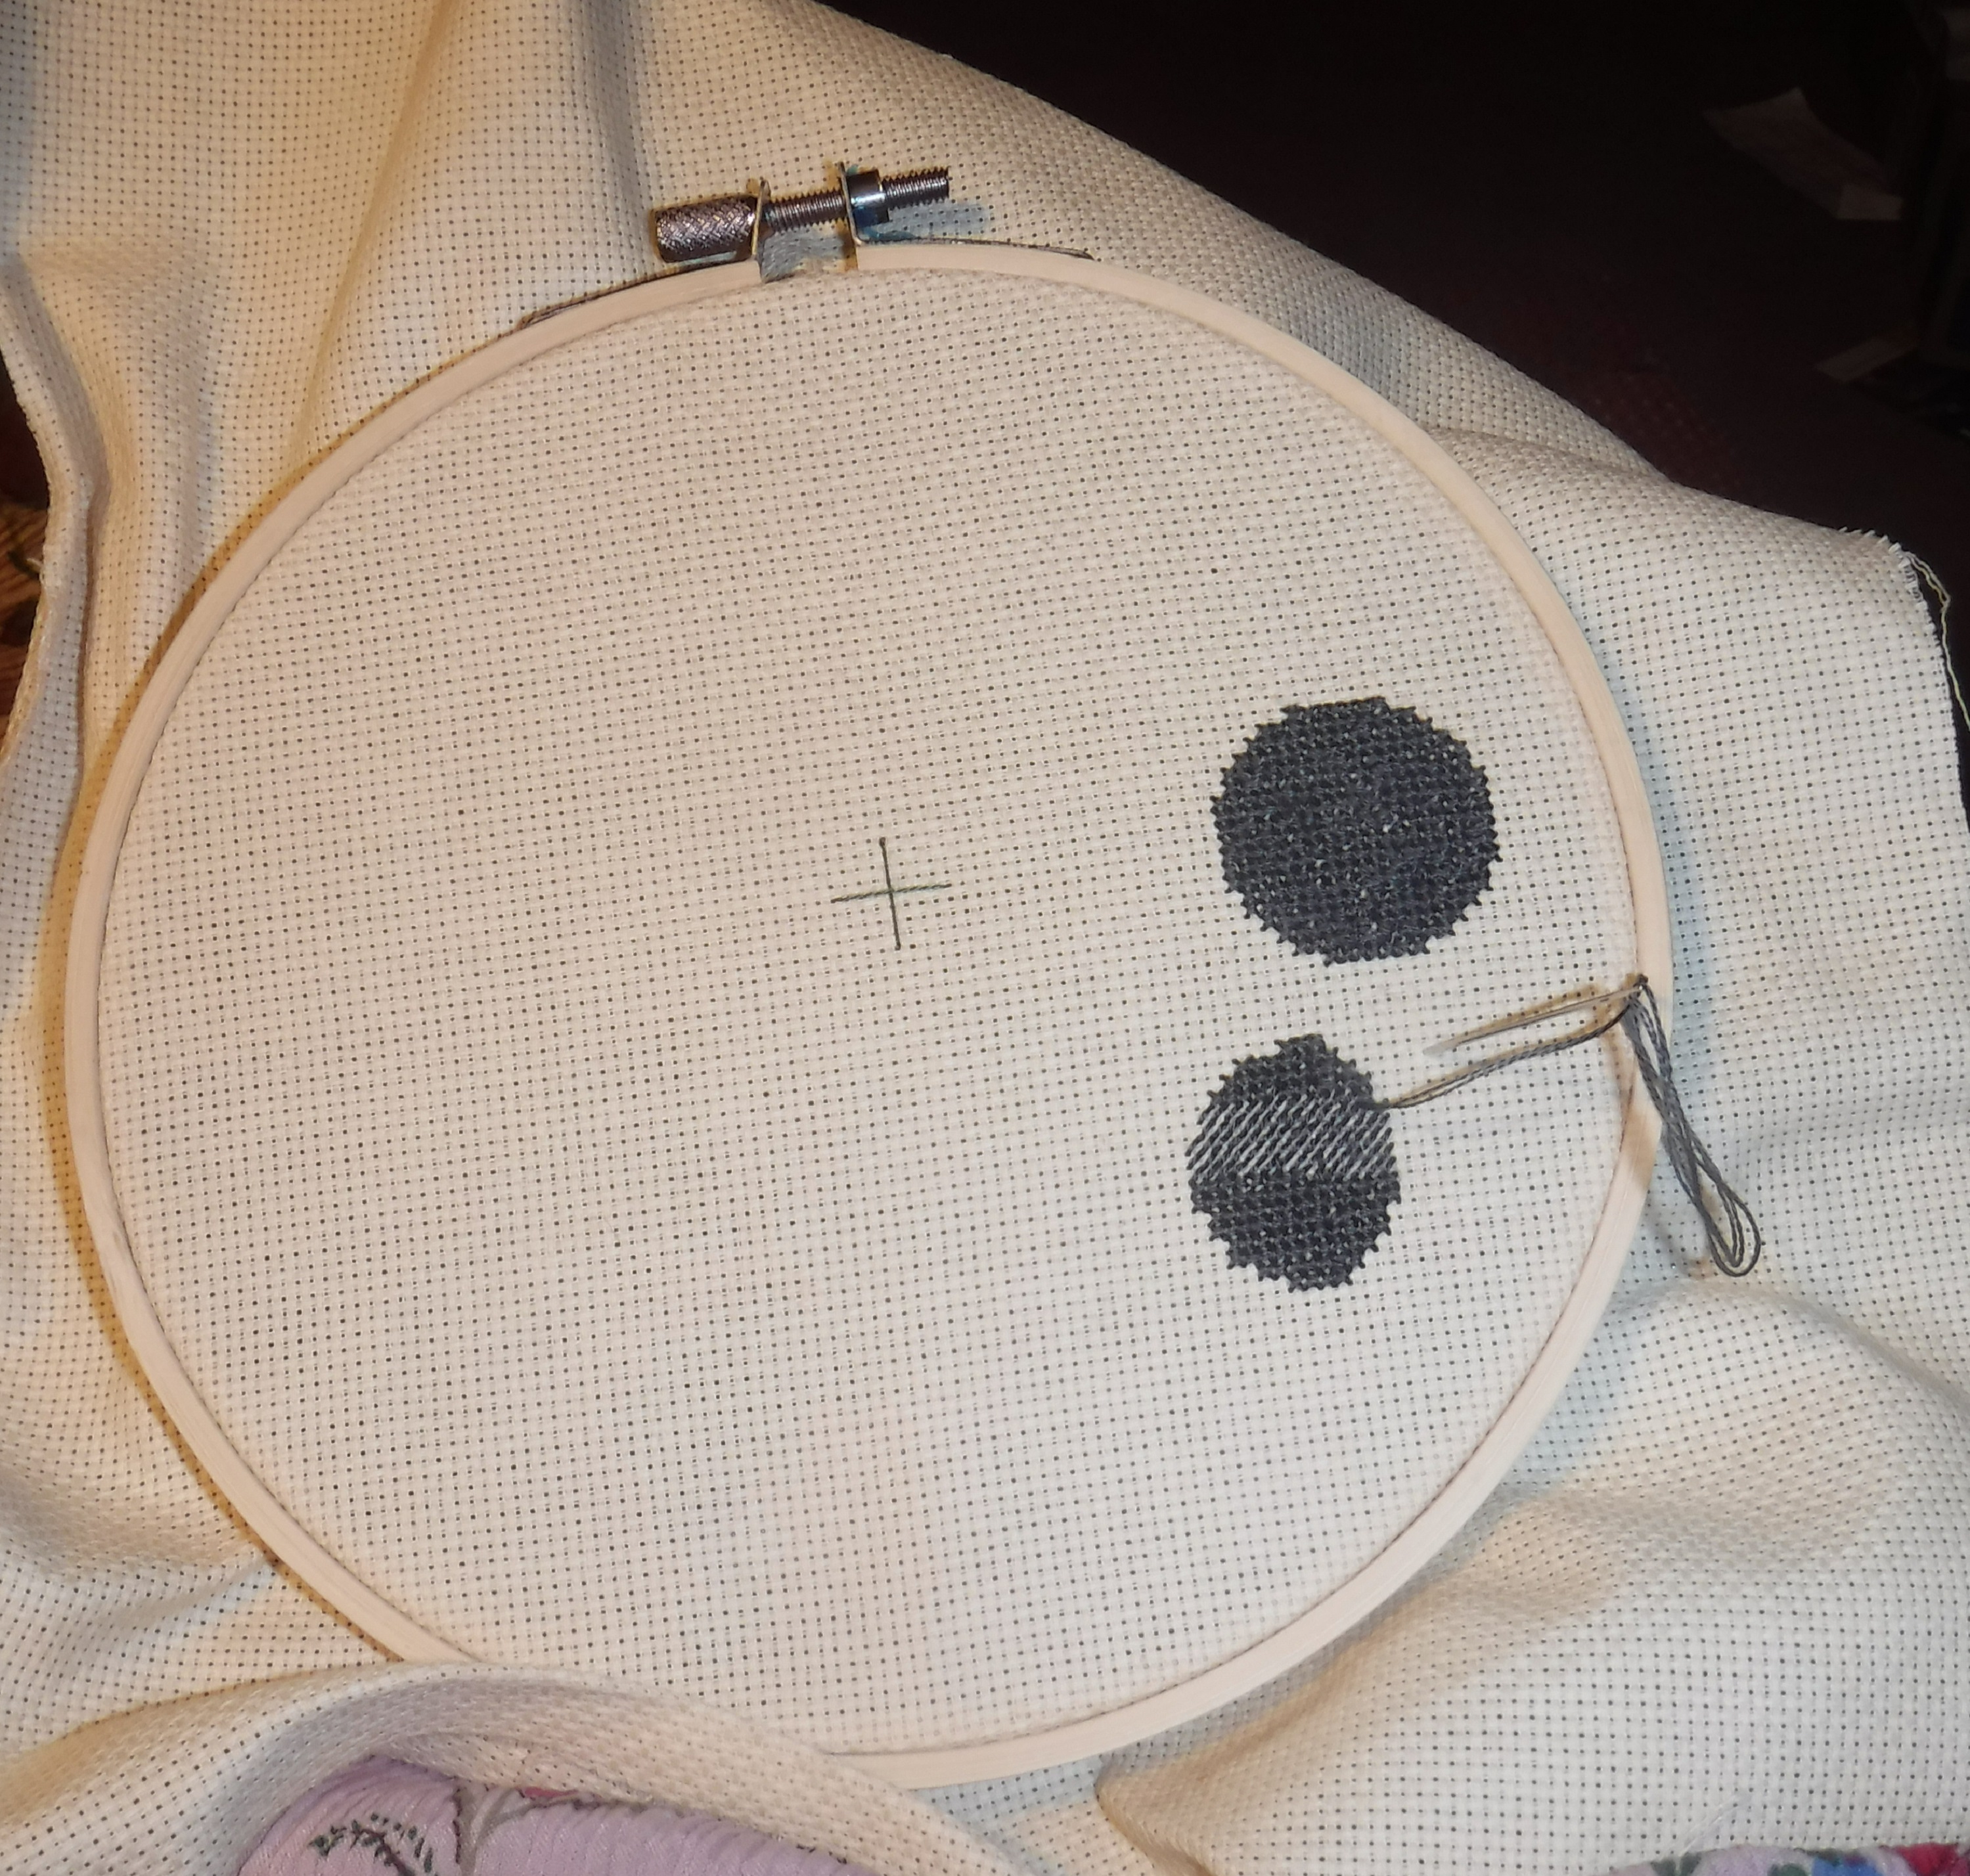 Photo taken by me of the progress on my current cross stitch